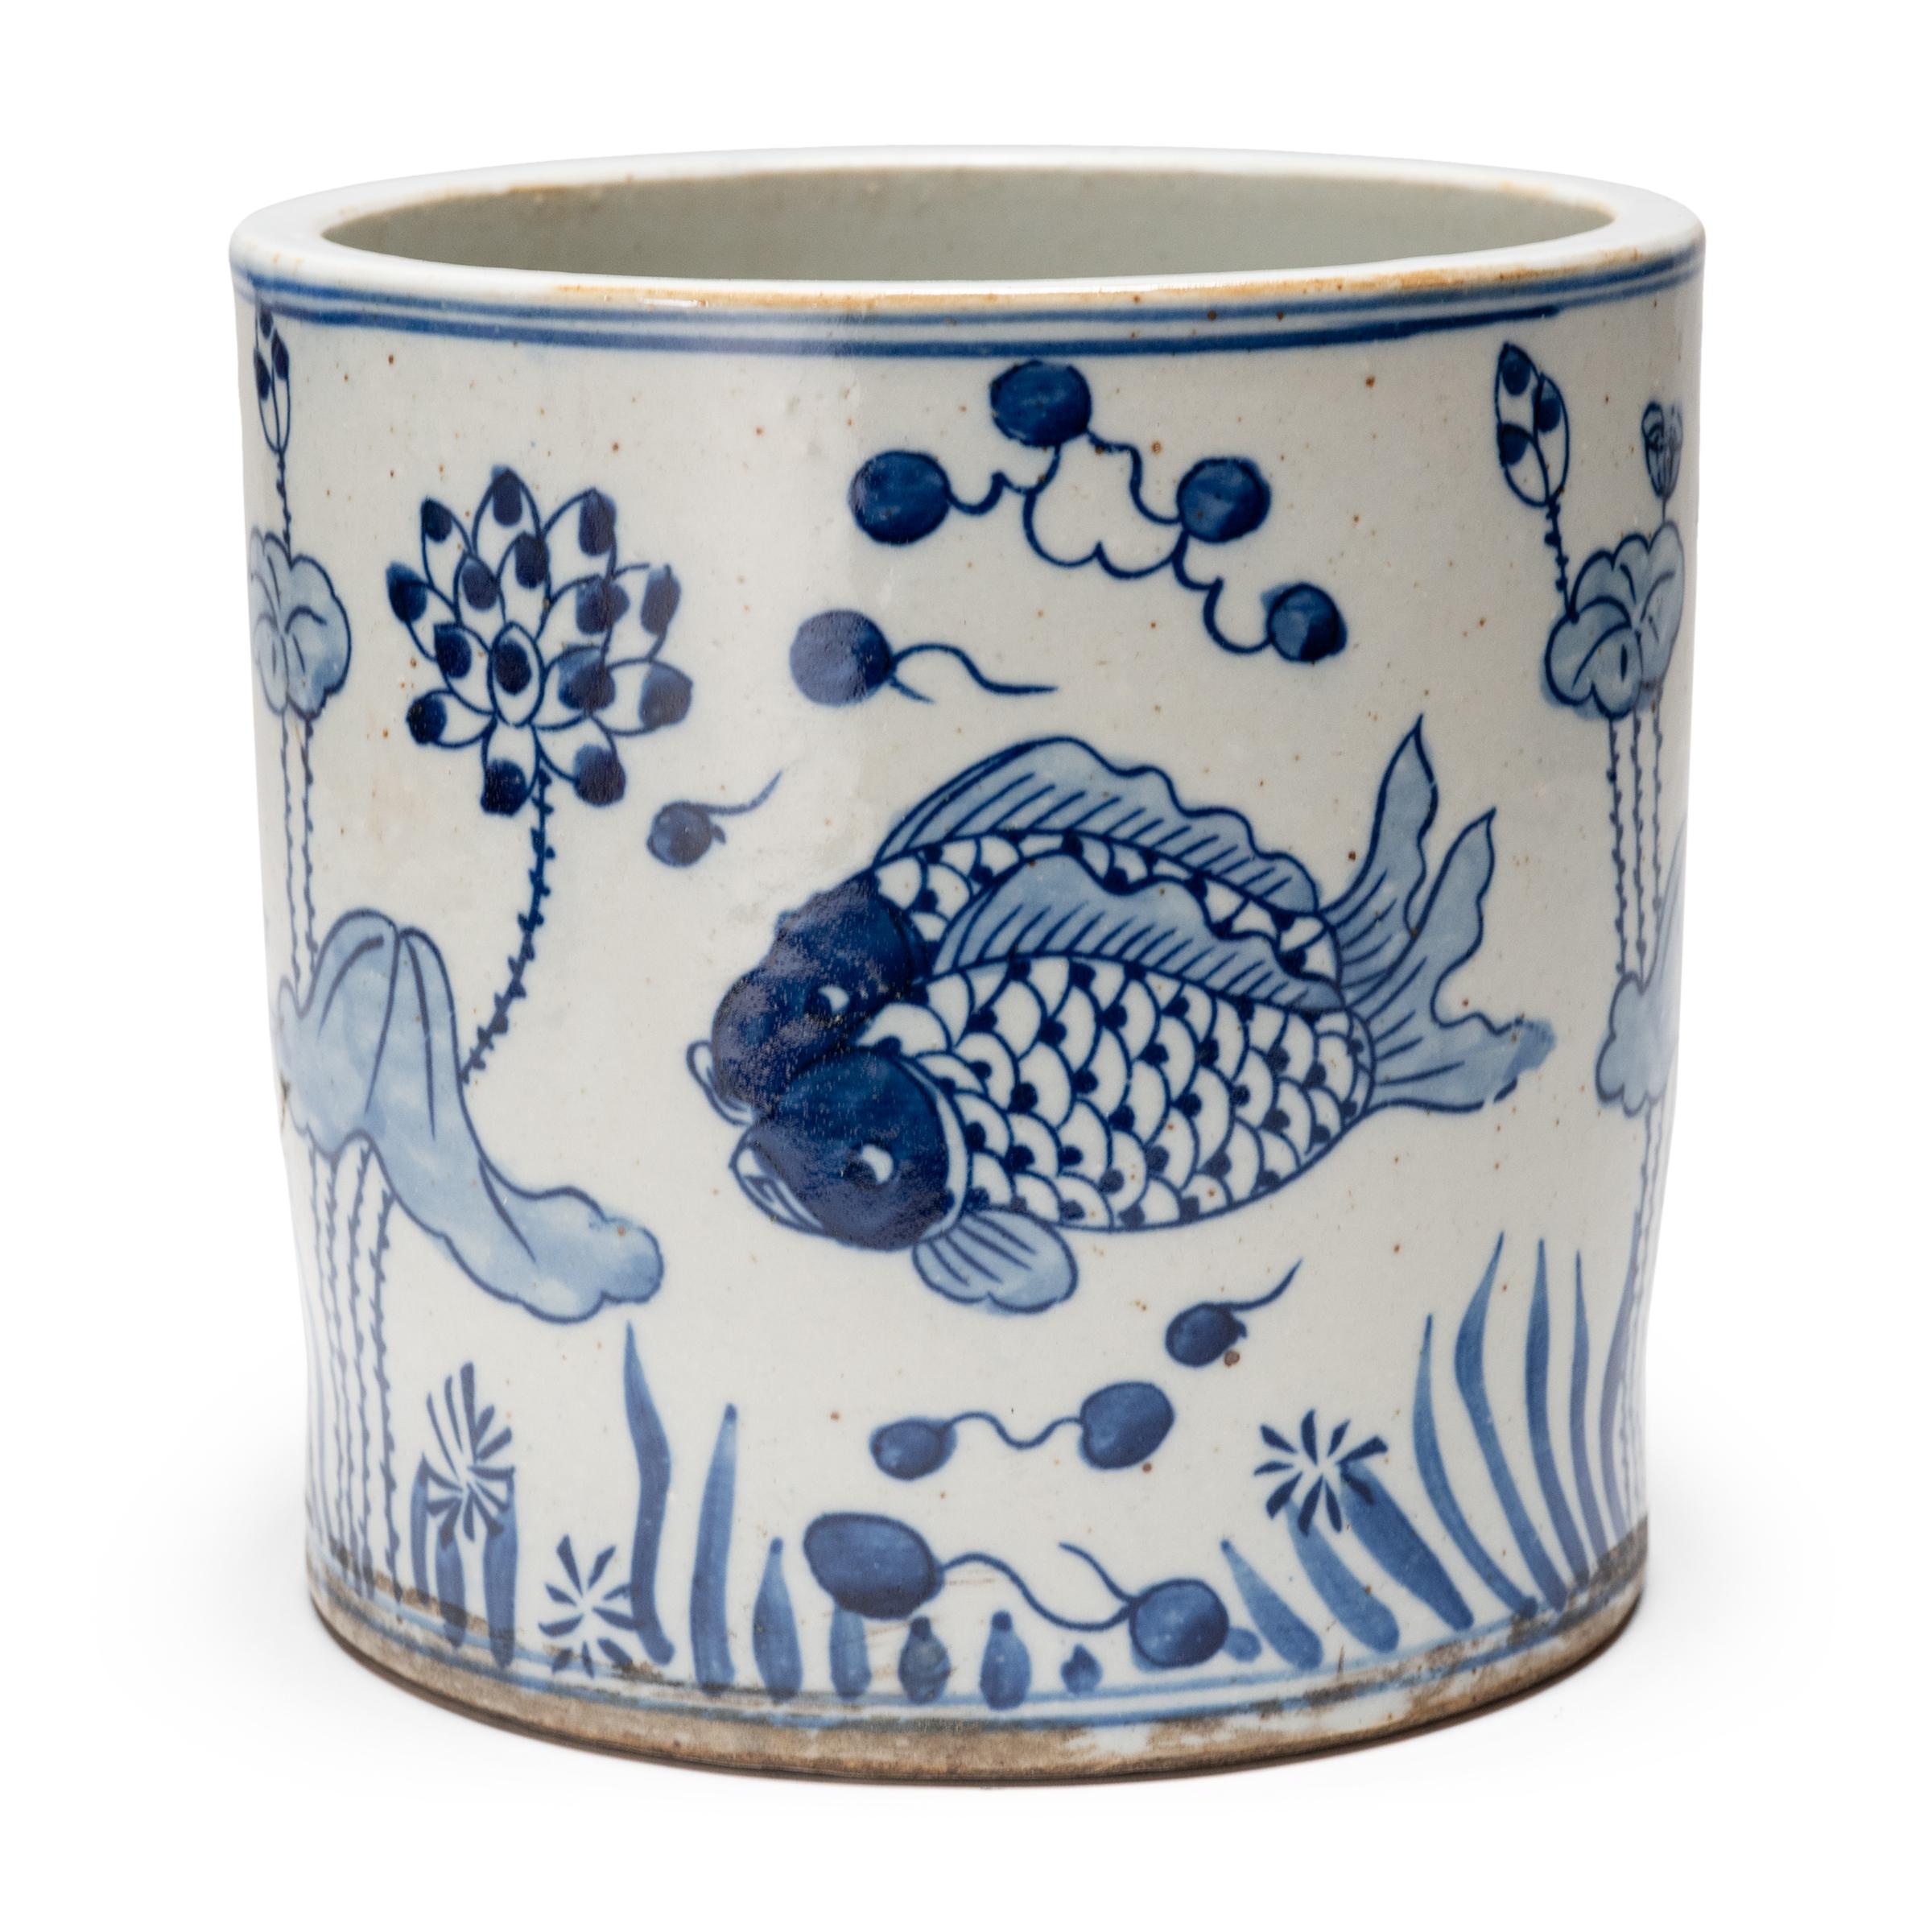 Glazed Blue and White Brush Pot with Fish & Flora